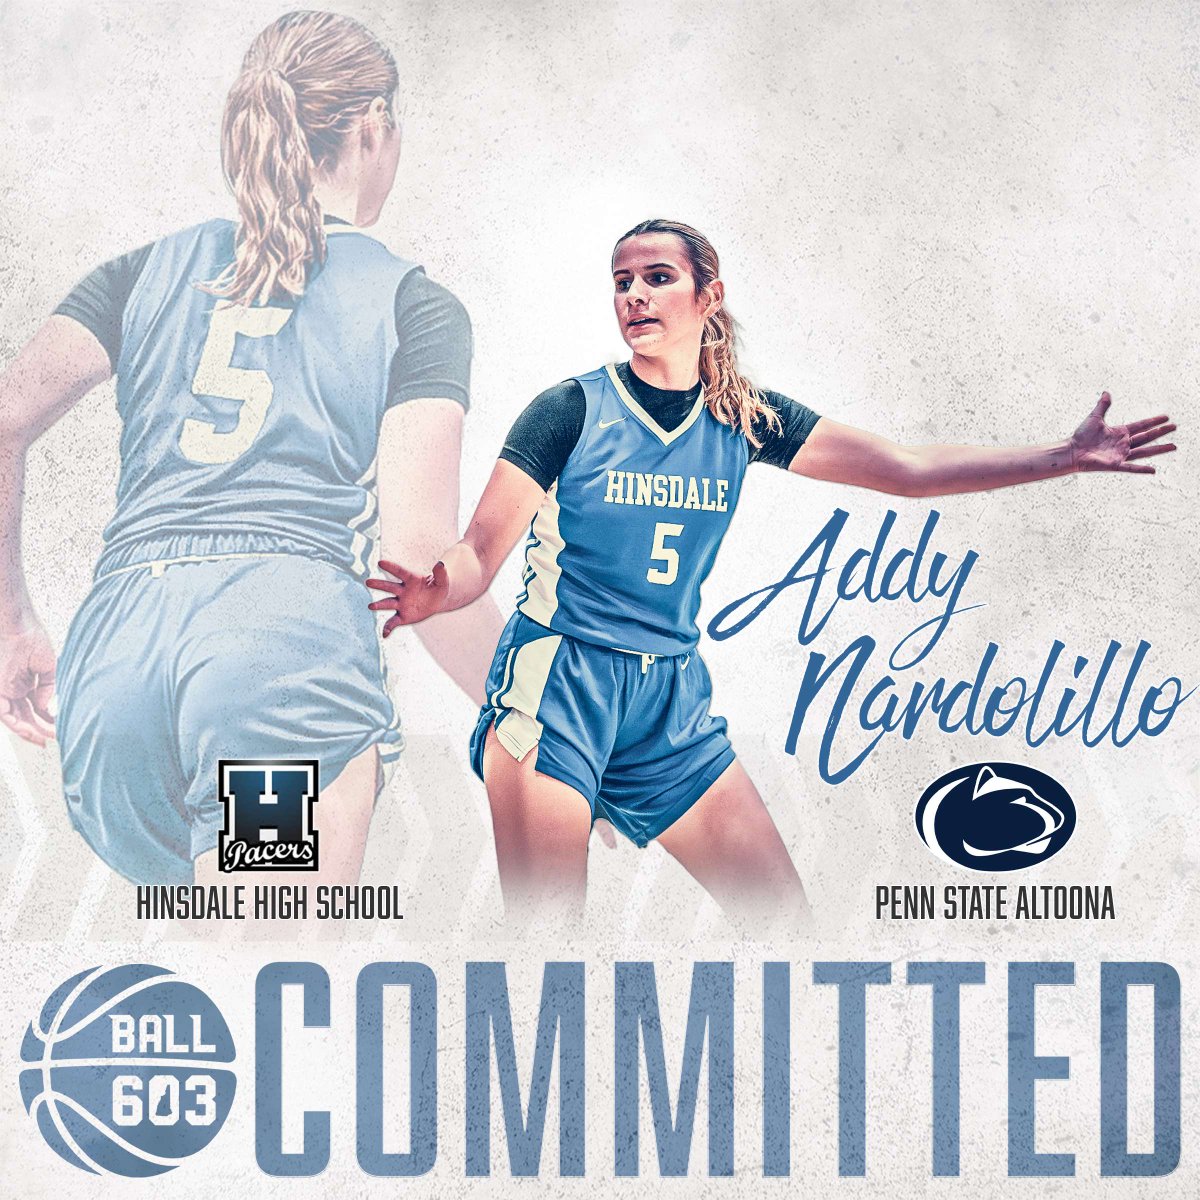 Upon graduating from Hinsdale HS this spring, Addy Nardolillo will continue her basketball career at Penn State Altoona in Altoona, Pa. A 2X 2nd Team All-State pick, Addy will study Pre-Medicine while playing for the Division III Lions. #Ball603committed @PSAltoonaLions @HNHSD